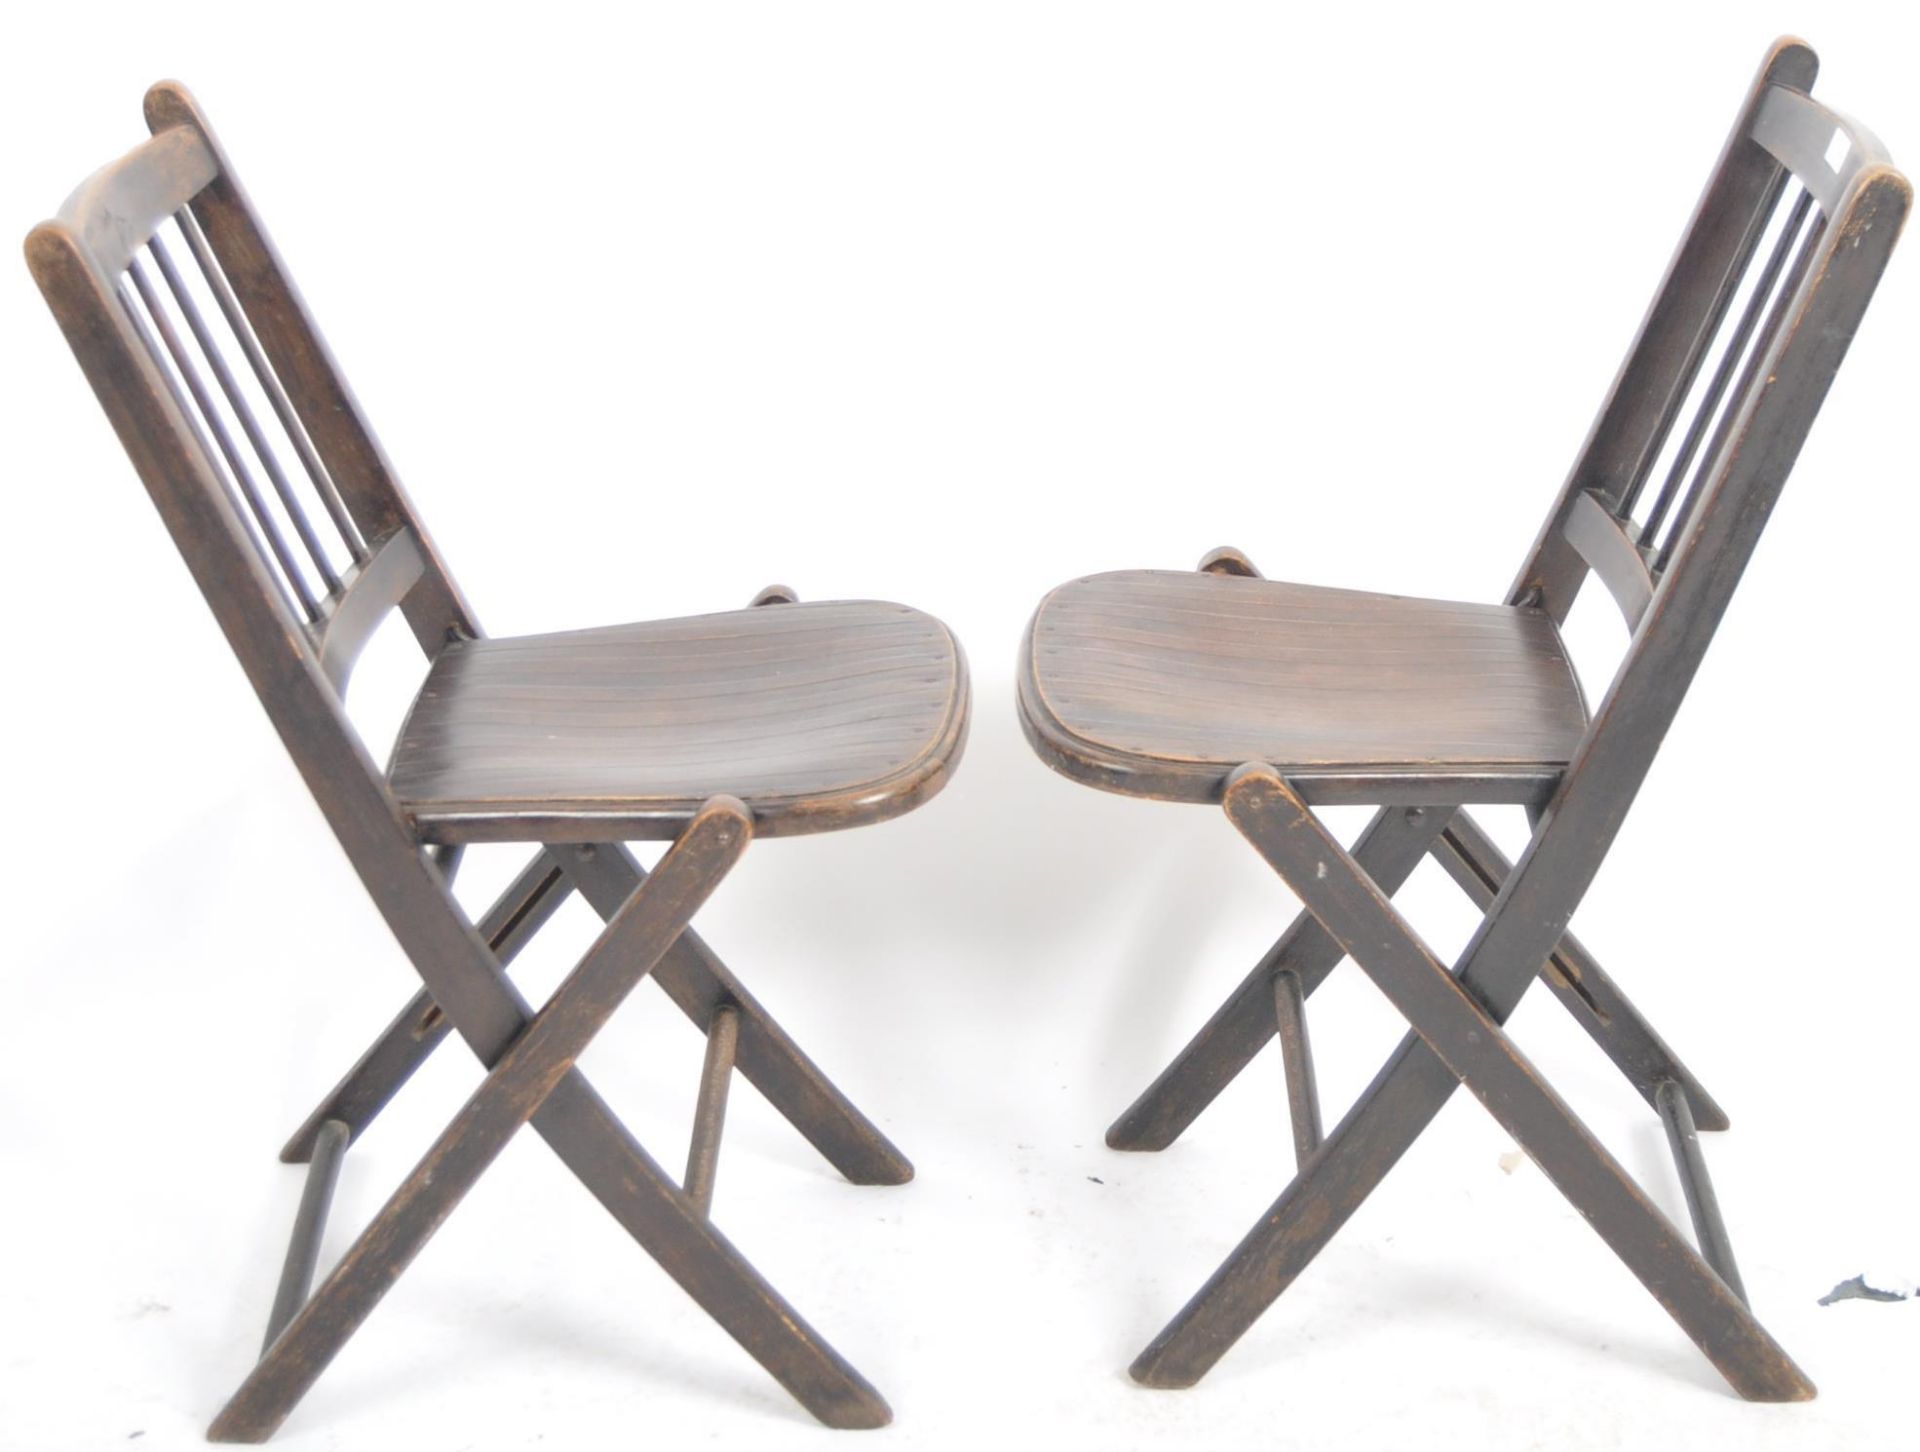 MICHAEL THONET - MATCHING PAIR OF BENTWOOD FOLDING CHAIRS - Image 7 of 11